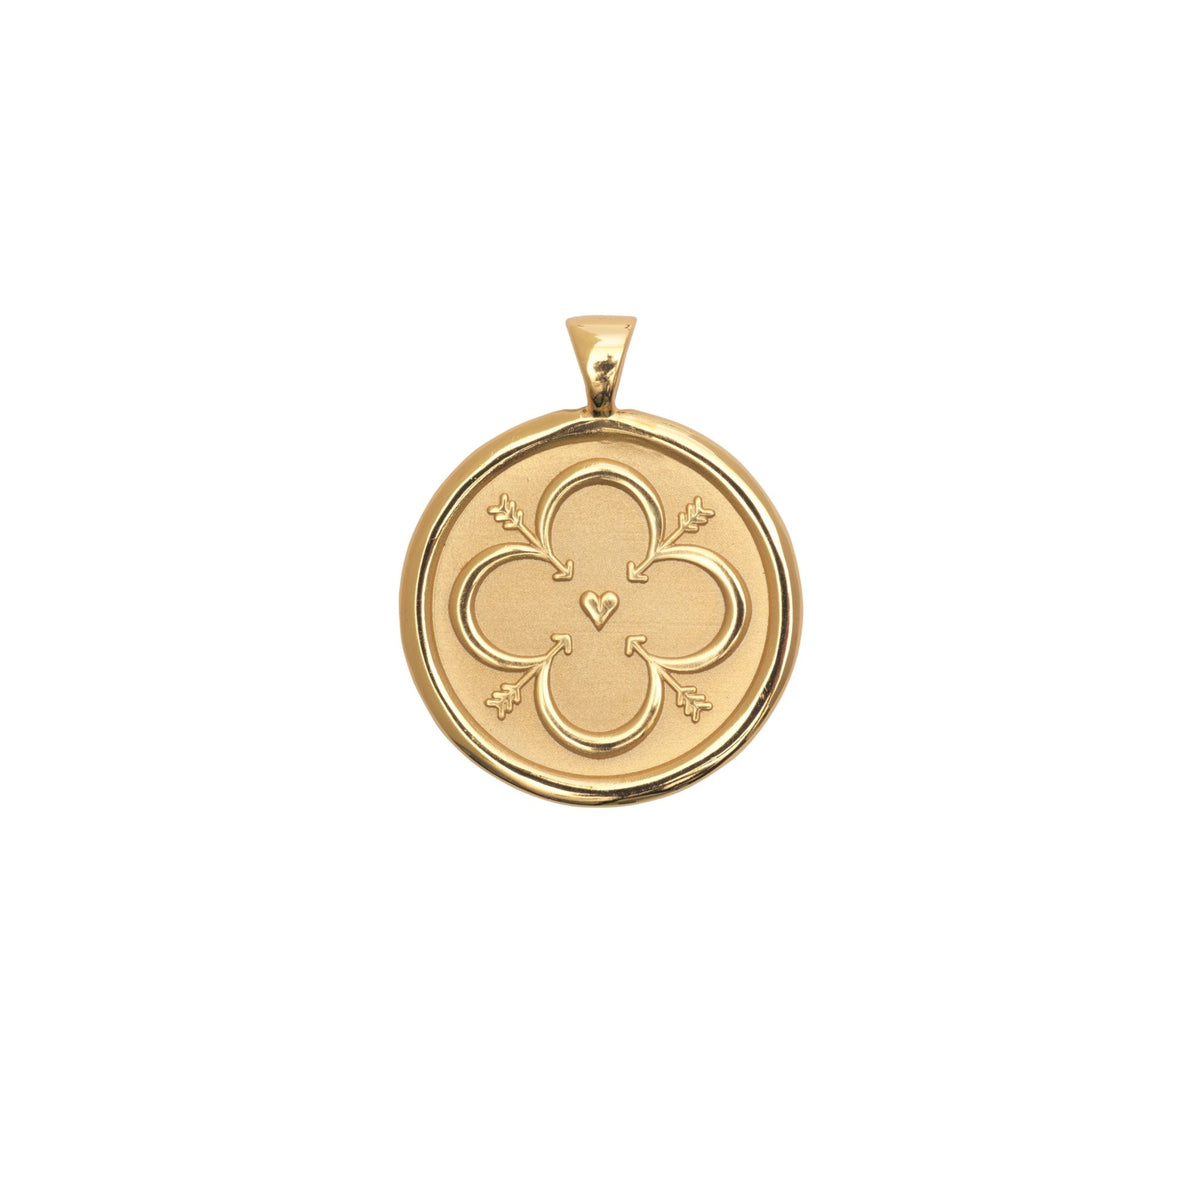 Love JW Small Pendant Coin Necklace